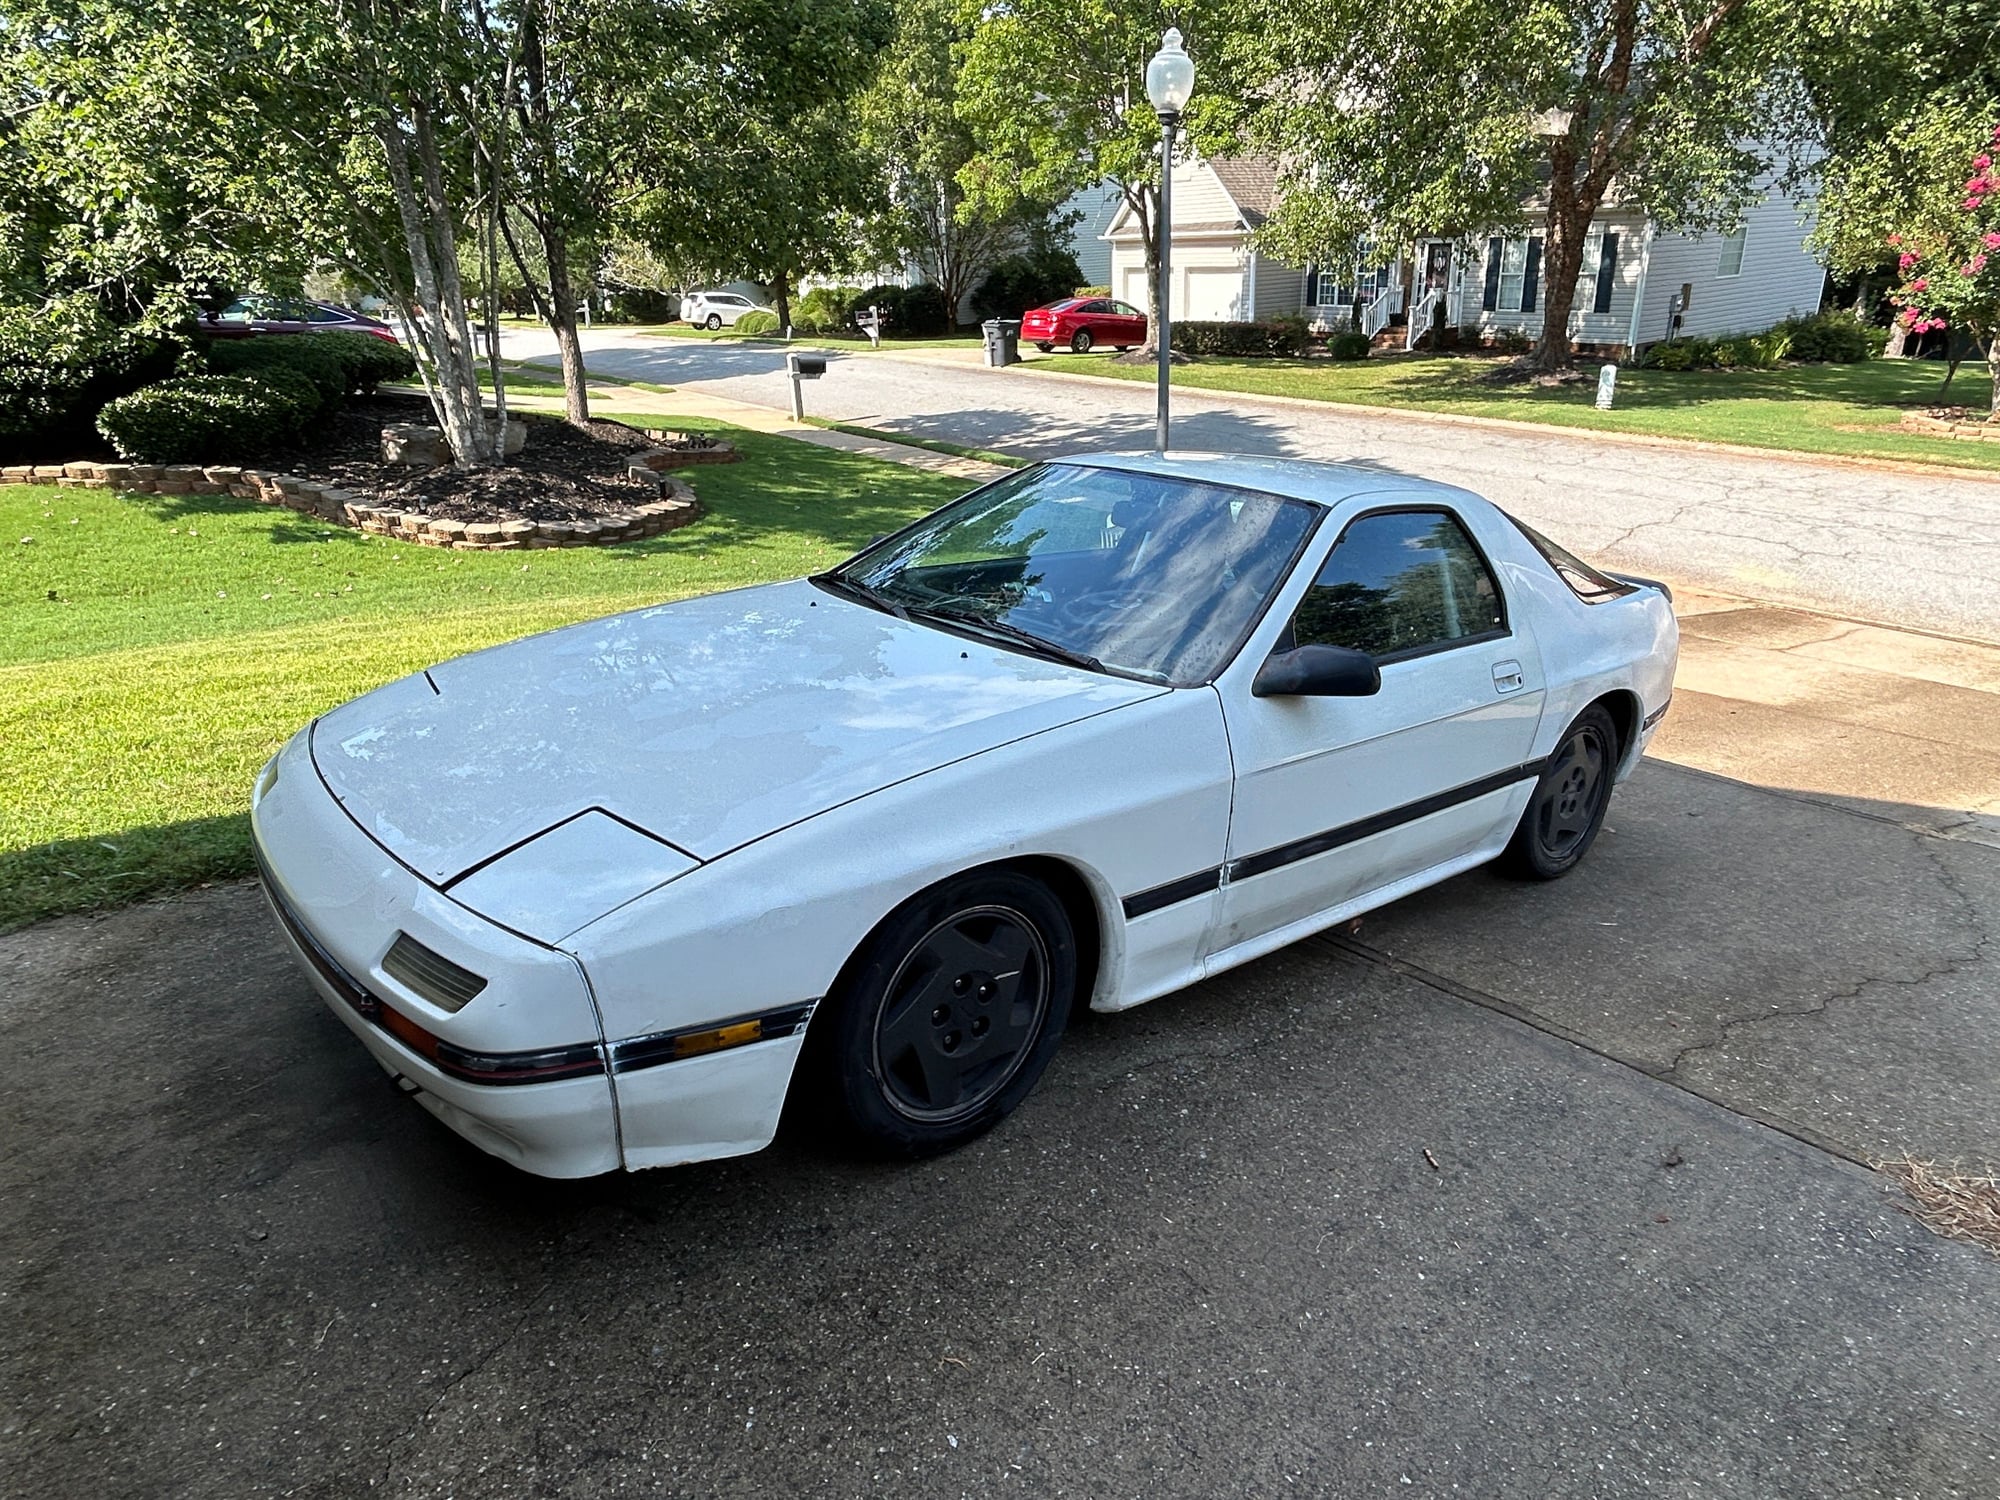 1986 Mazda RX-7 - 1986 RX7 Track Car - Used - VIN JM1FC3312G0114910 - 250,000 Miles - Other - 2WD - Manual - Coupe - White - Greenville, SC 29617, United States